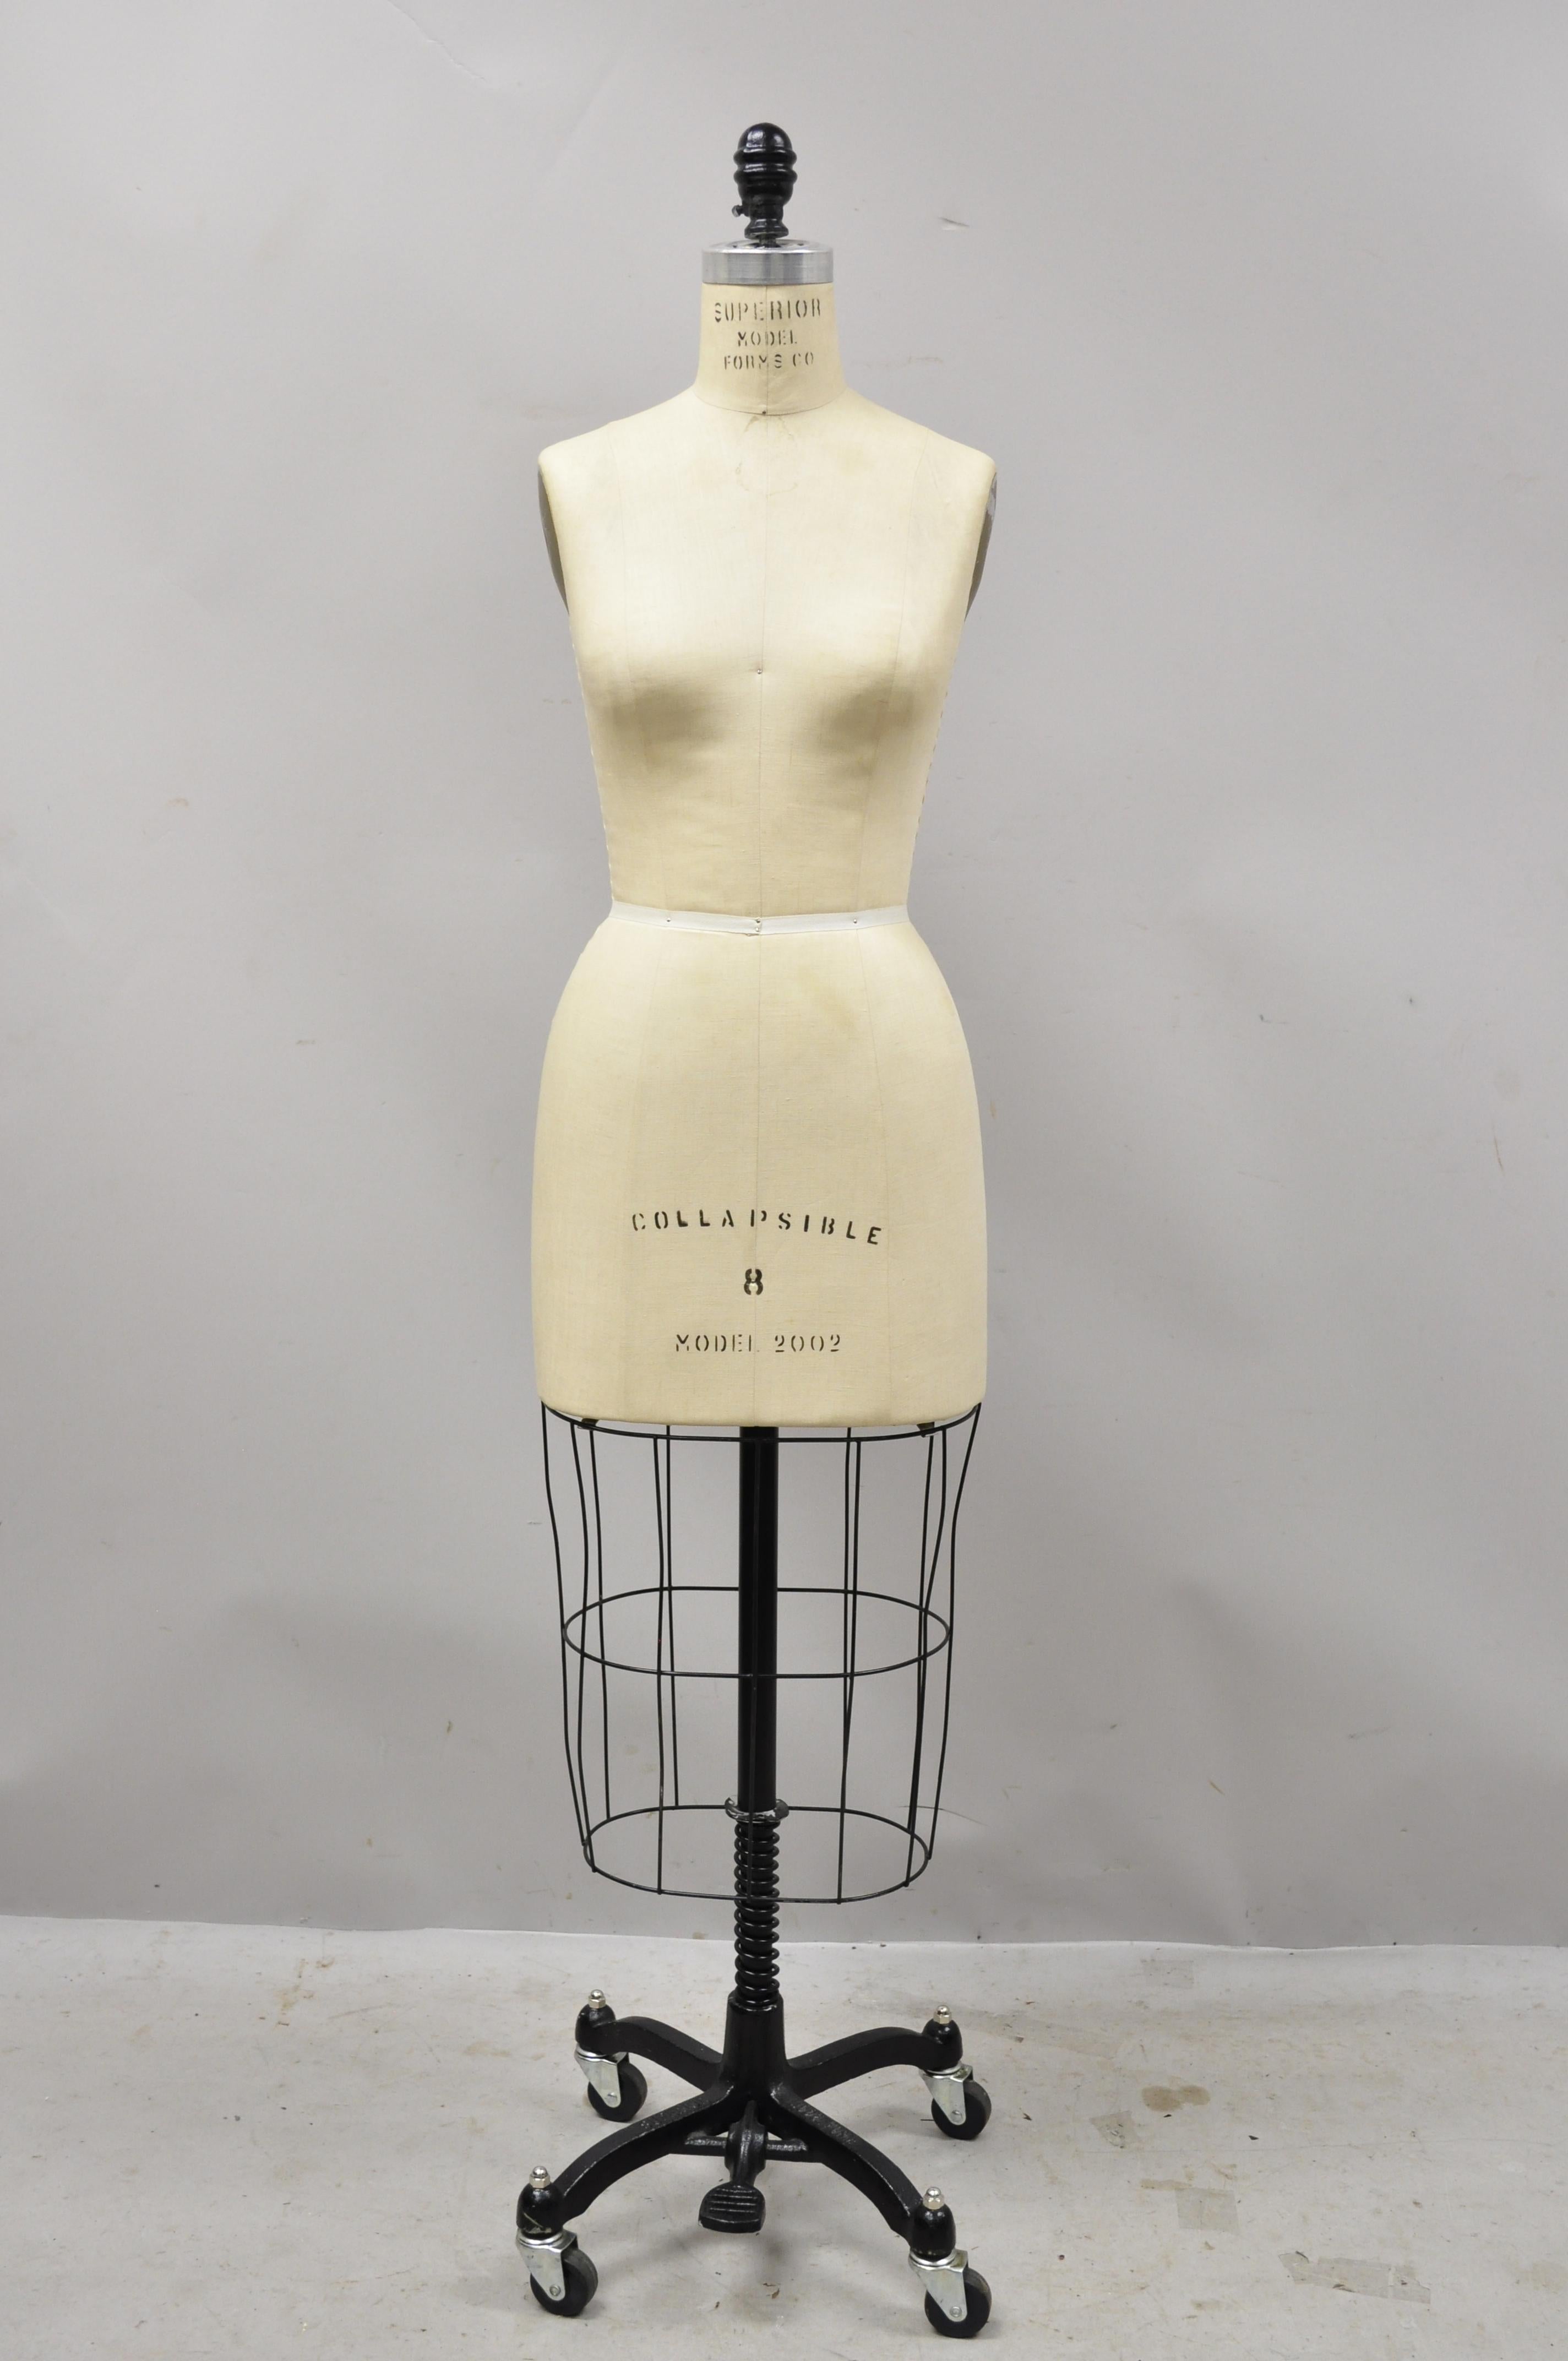 Superior Model Forms Co. Model 2002 Iron Cage Dress Form Mannequin 2